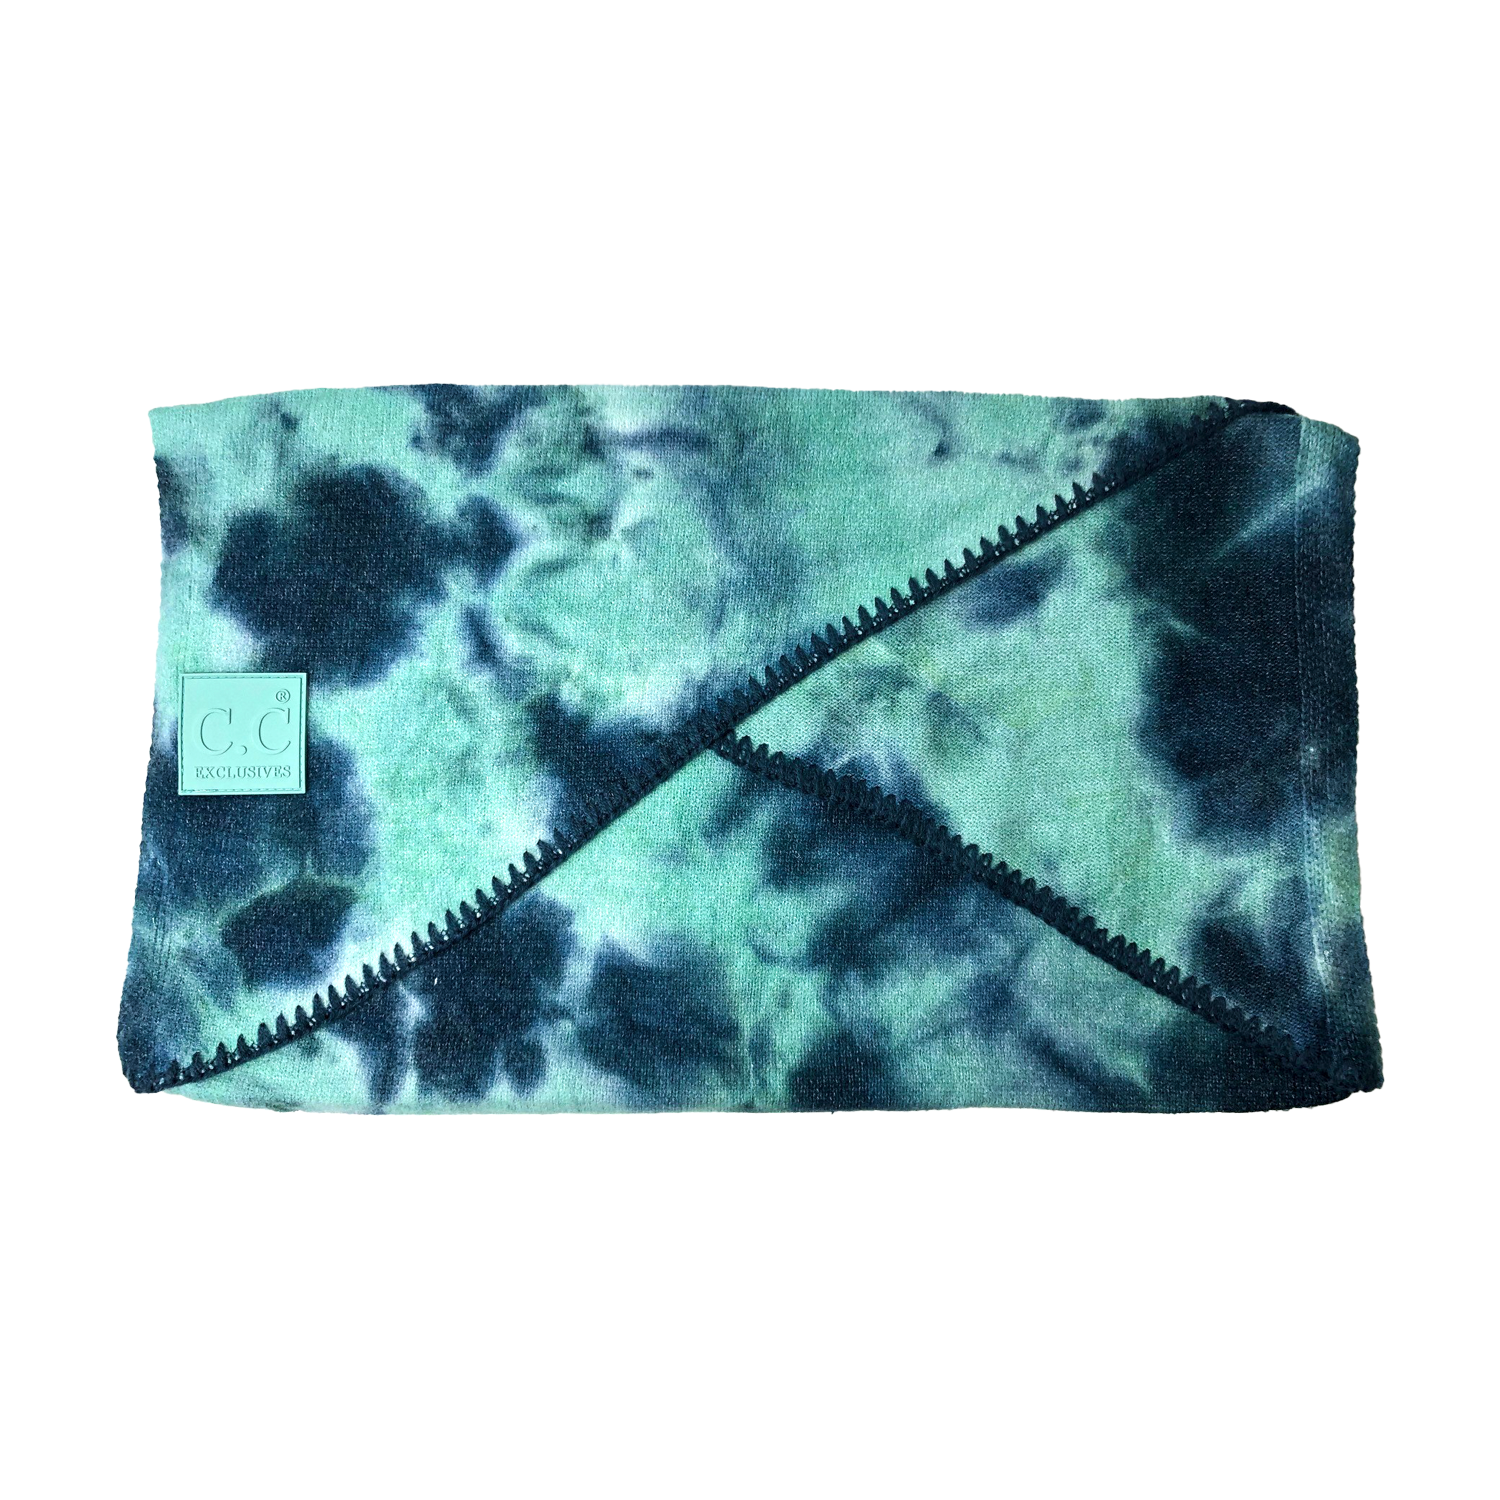 SF-7380 Tie Dye Scarf with C.C Rubber Patch - Deep Teal/Sea Green